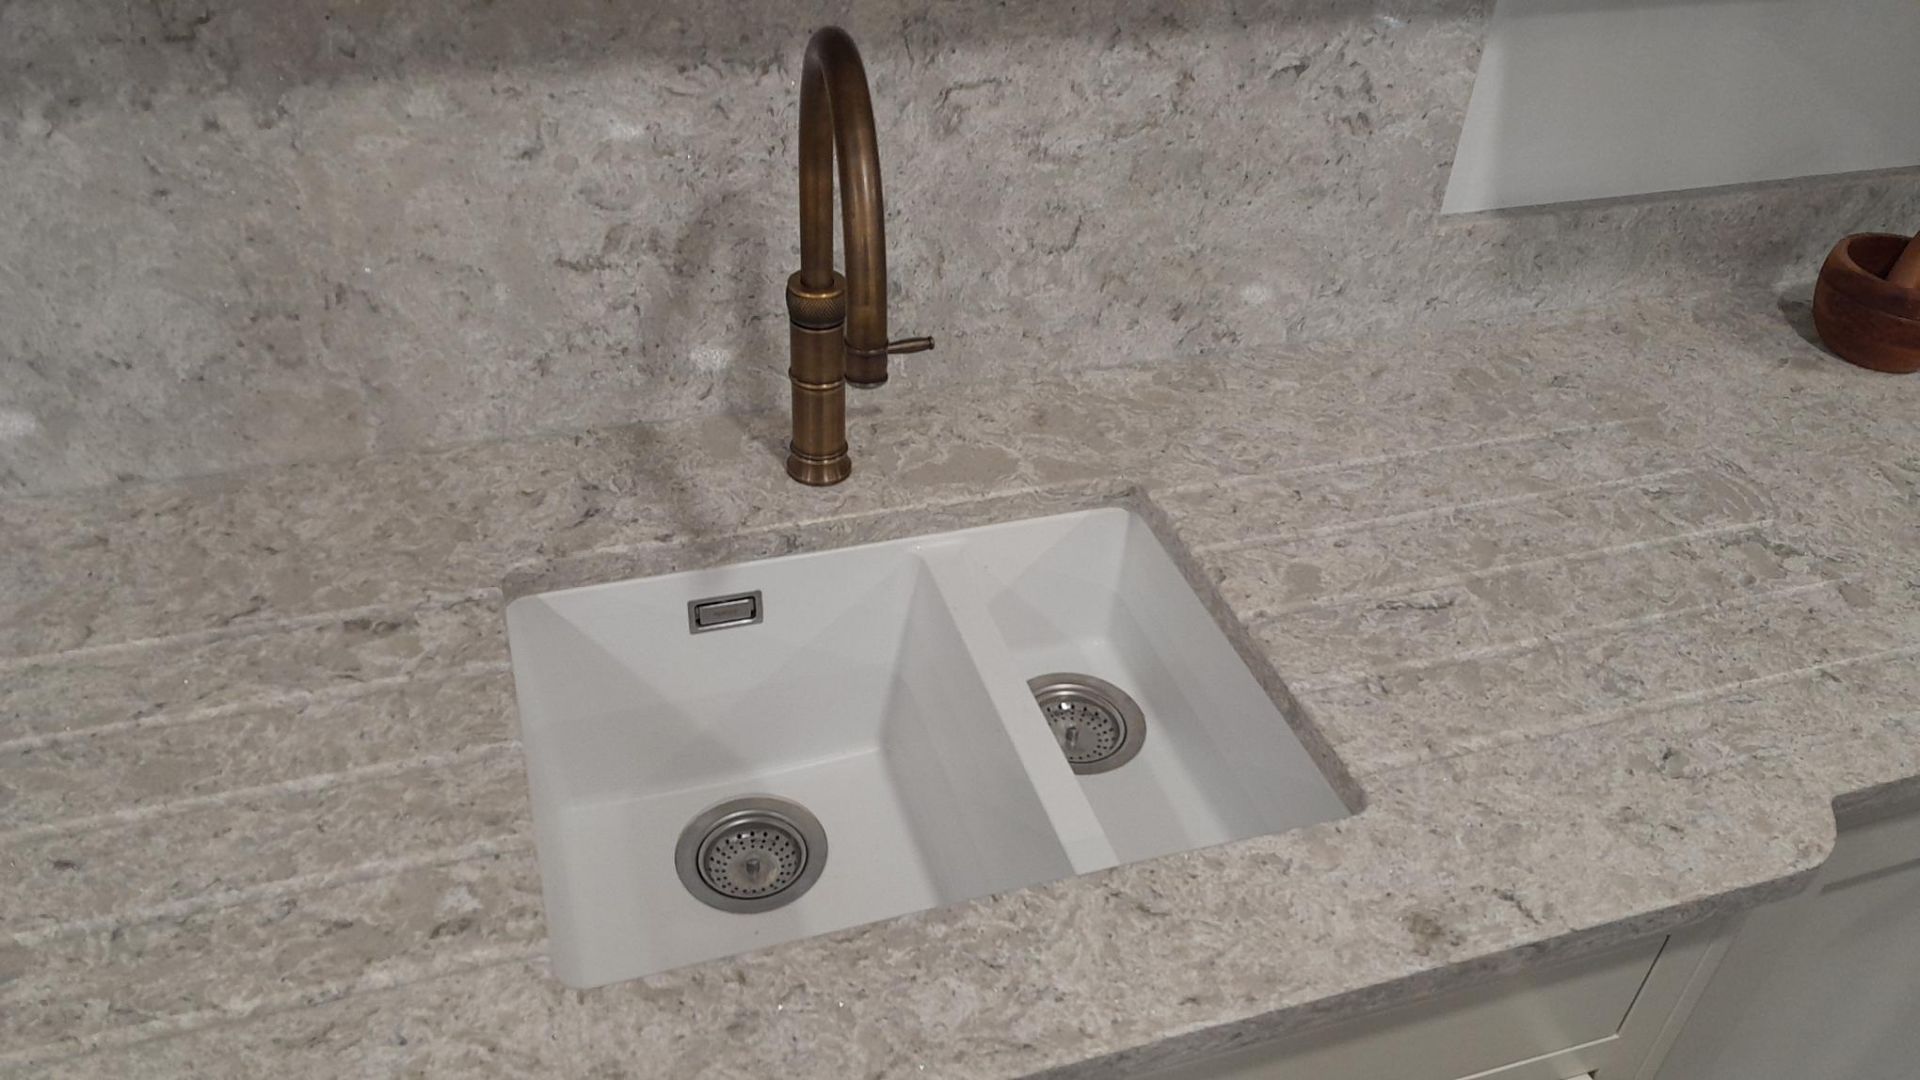 Belgravia Ex Display In frame shaker kitchen to include Schock dual basin undermounted sink, - Image 7 of 9